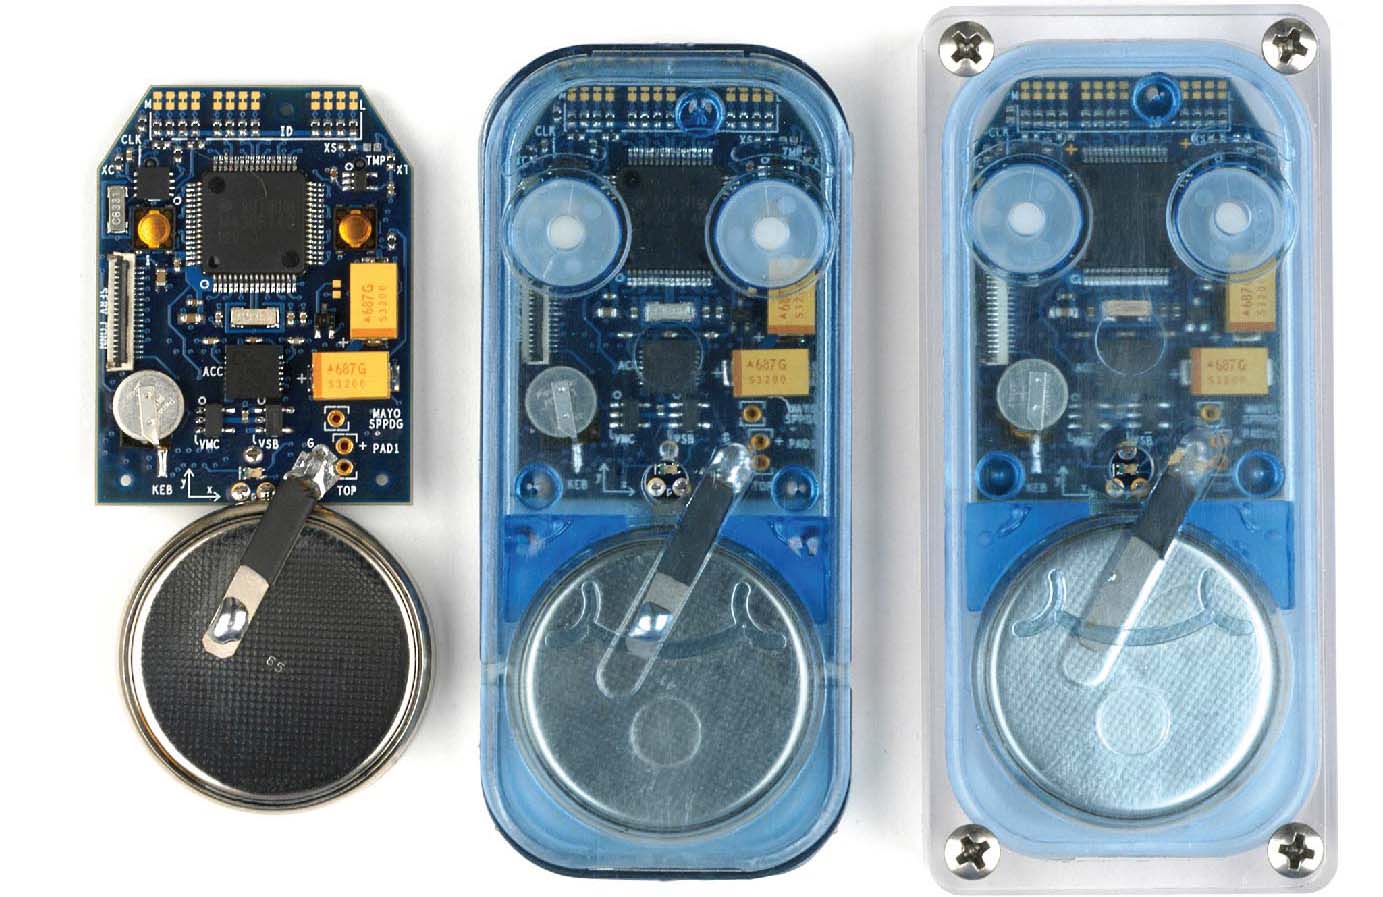 Posture and activity detector 1 (PAD1) printed circuit board assembly shown next to two different styles of PAD1 case assemblies